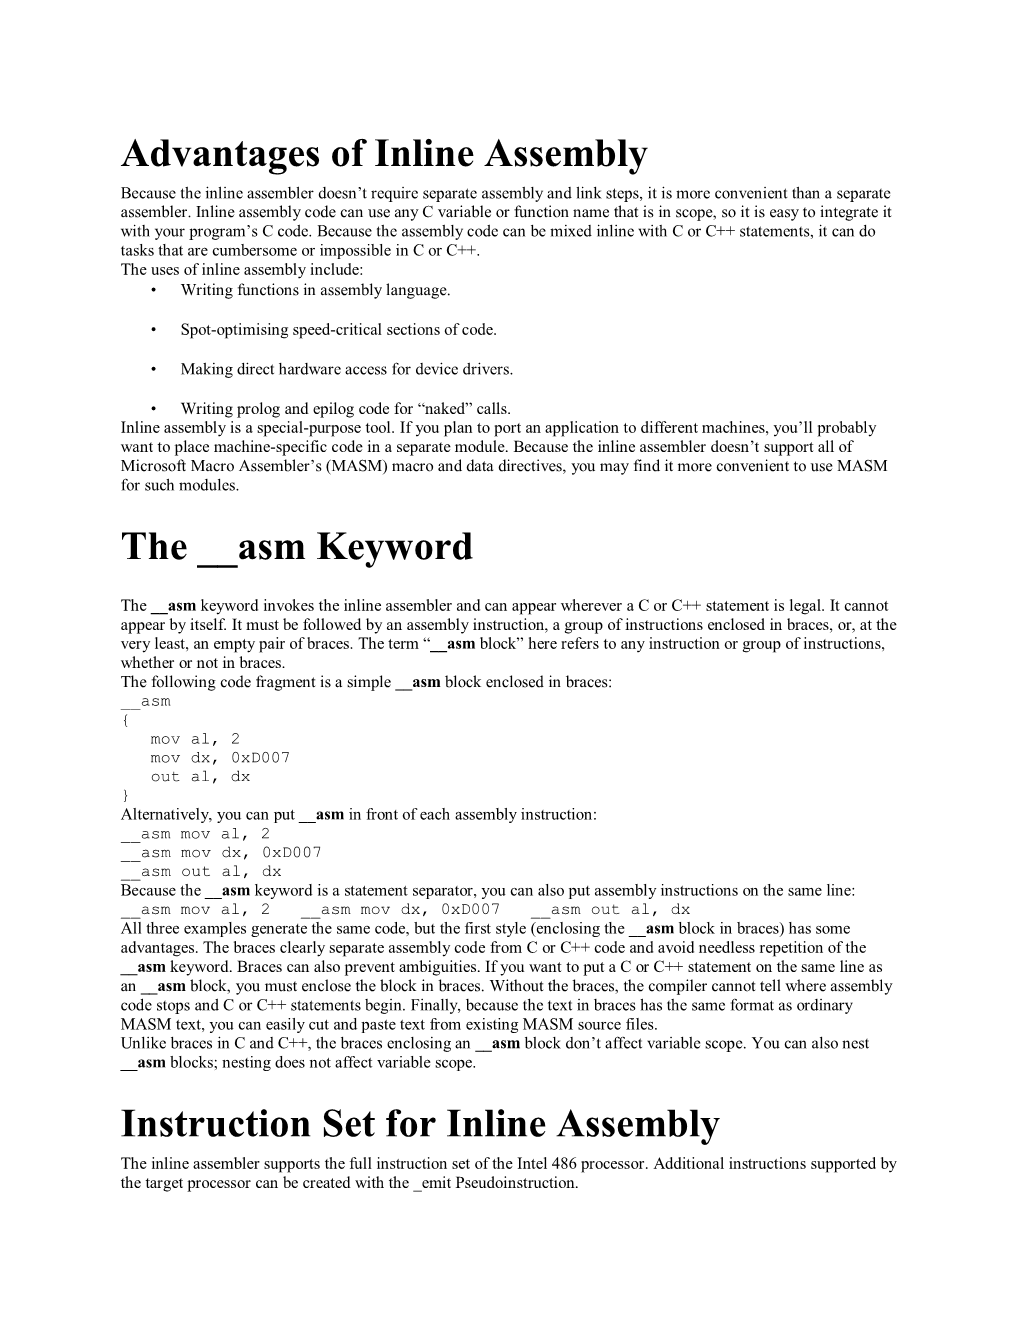 Advantages of Inline Assembly Because the Inline Assembler Doesn’T Require Separate Assembly and Link Steps, It Is More Convenient Than a Separate Assembler